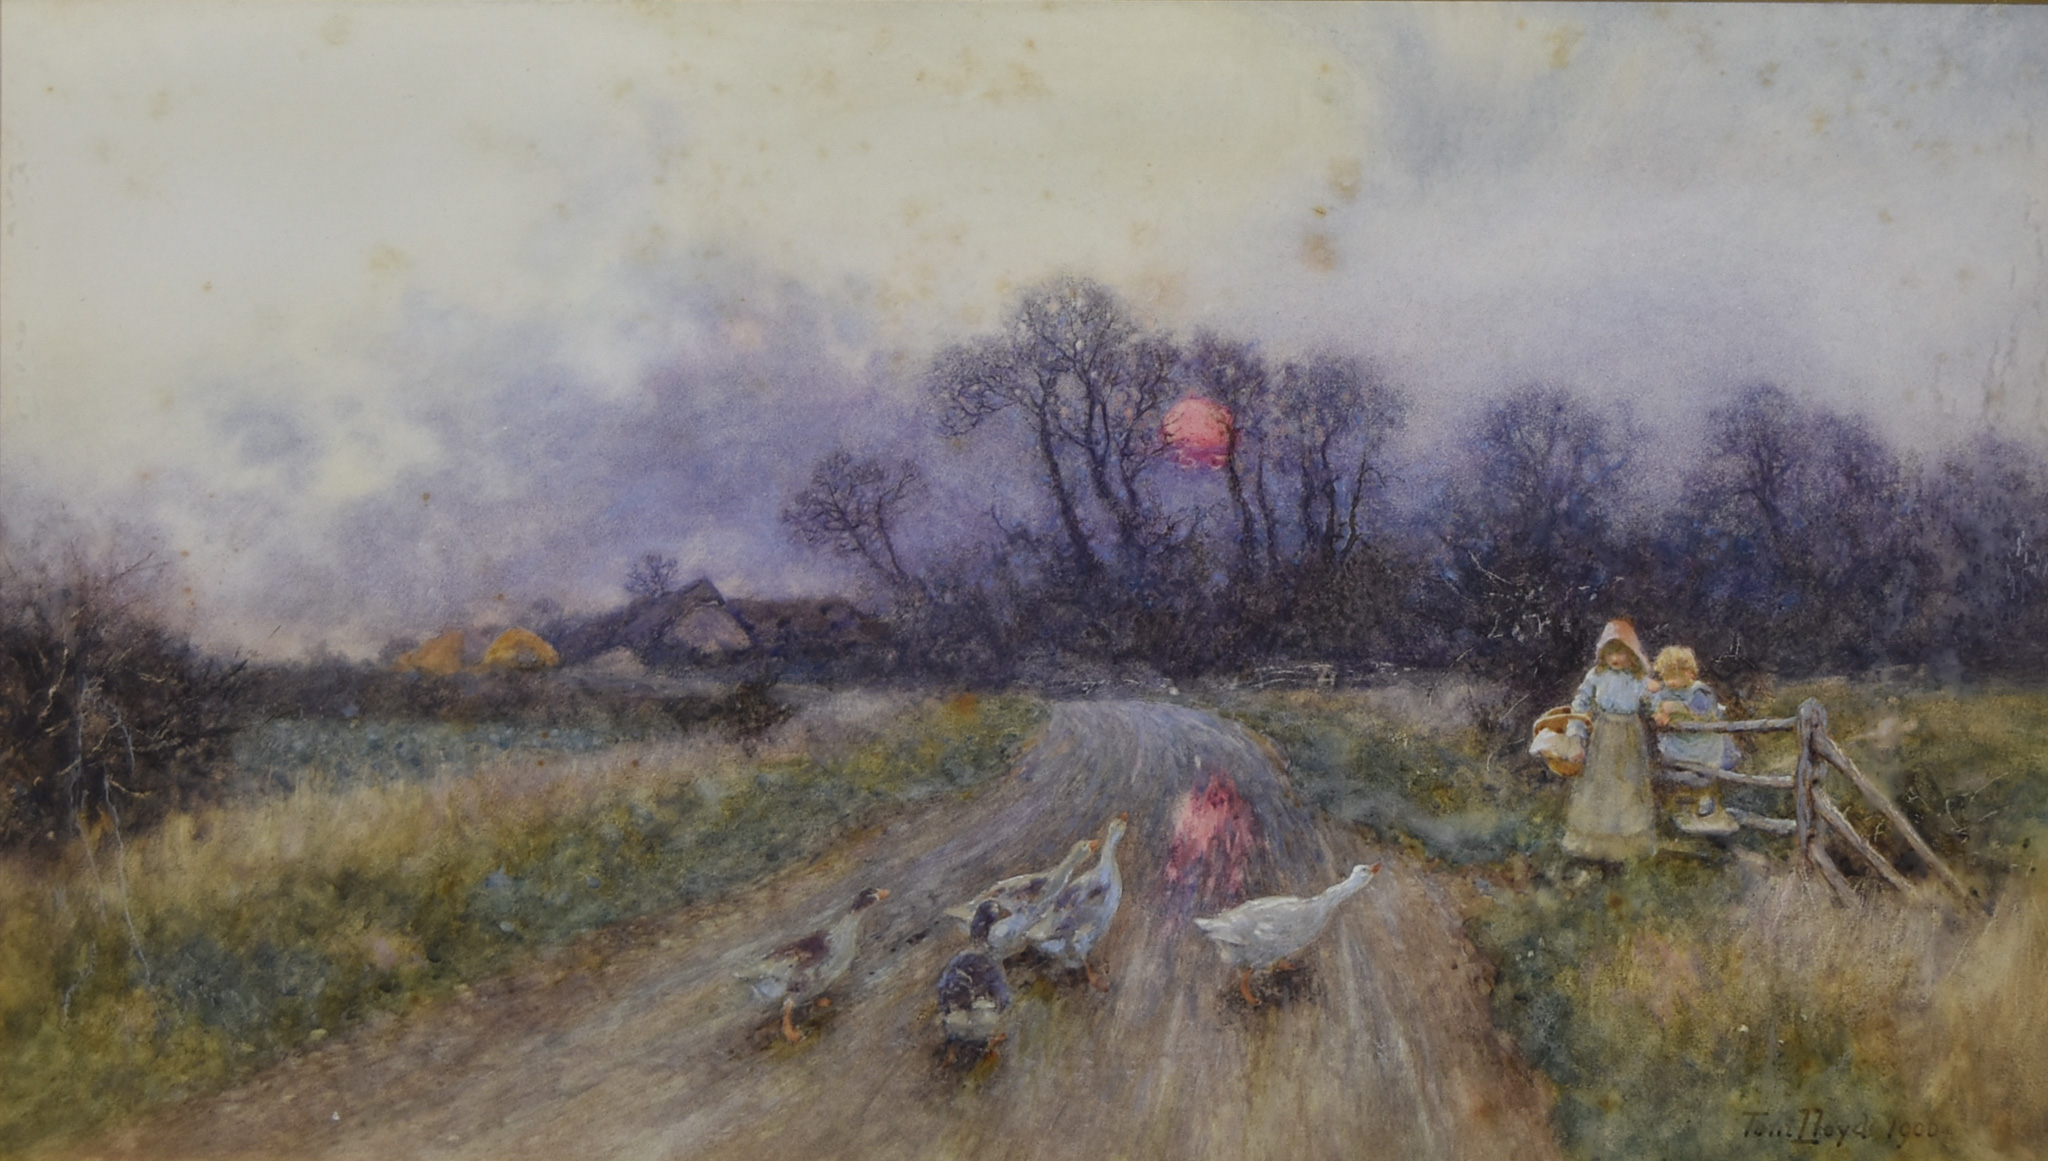 Tom Lloyd (1849-1910) - Watercolour - "Held Up" - Sunset over a rural landscape with two children by